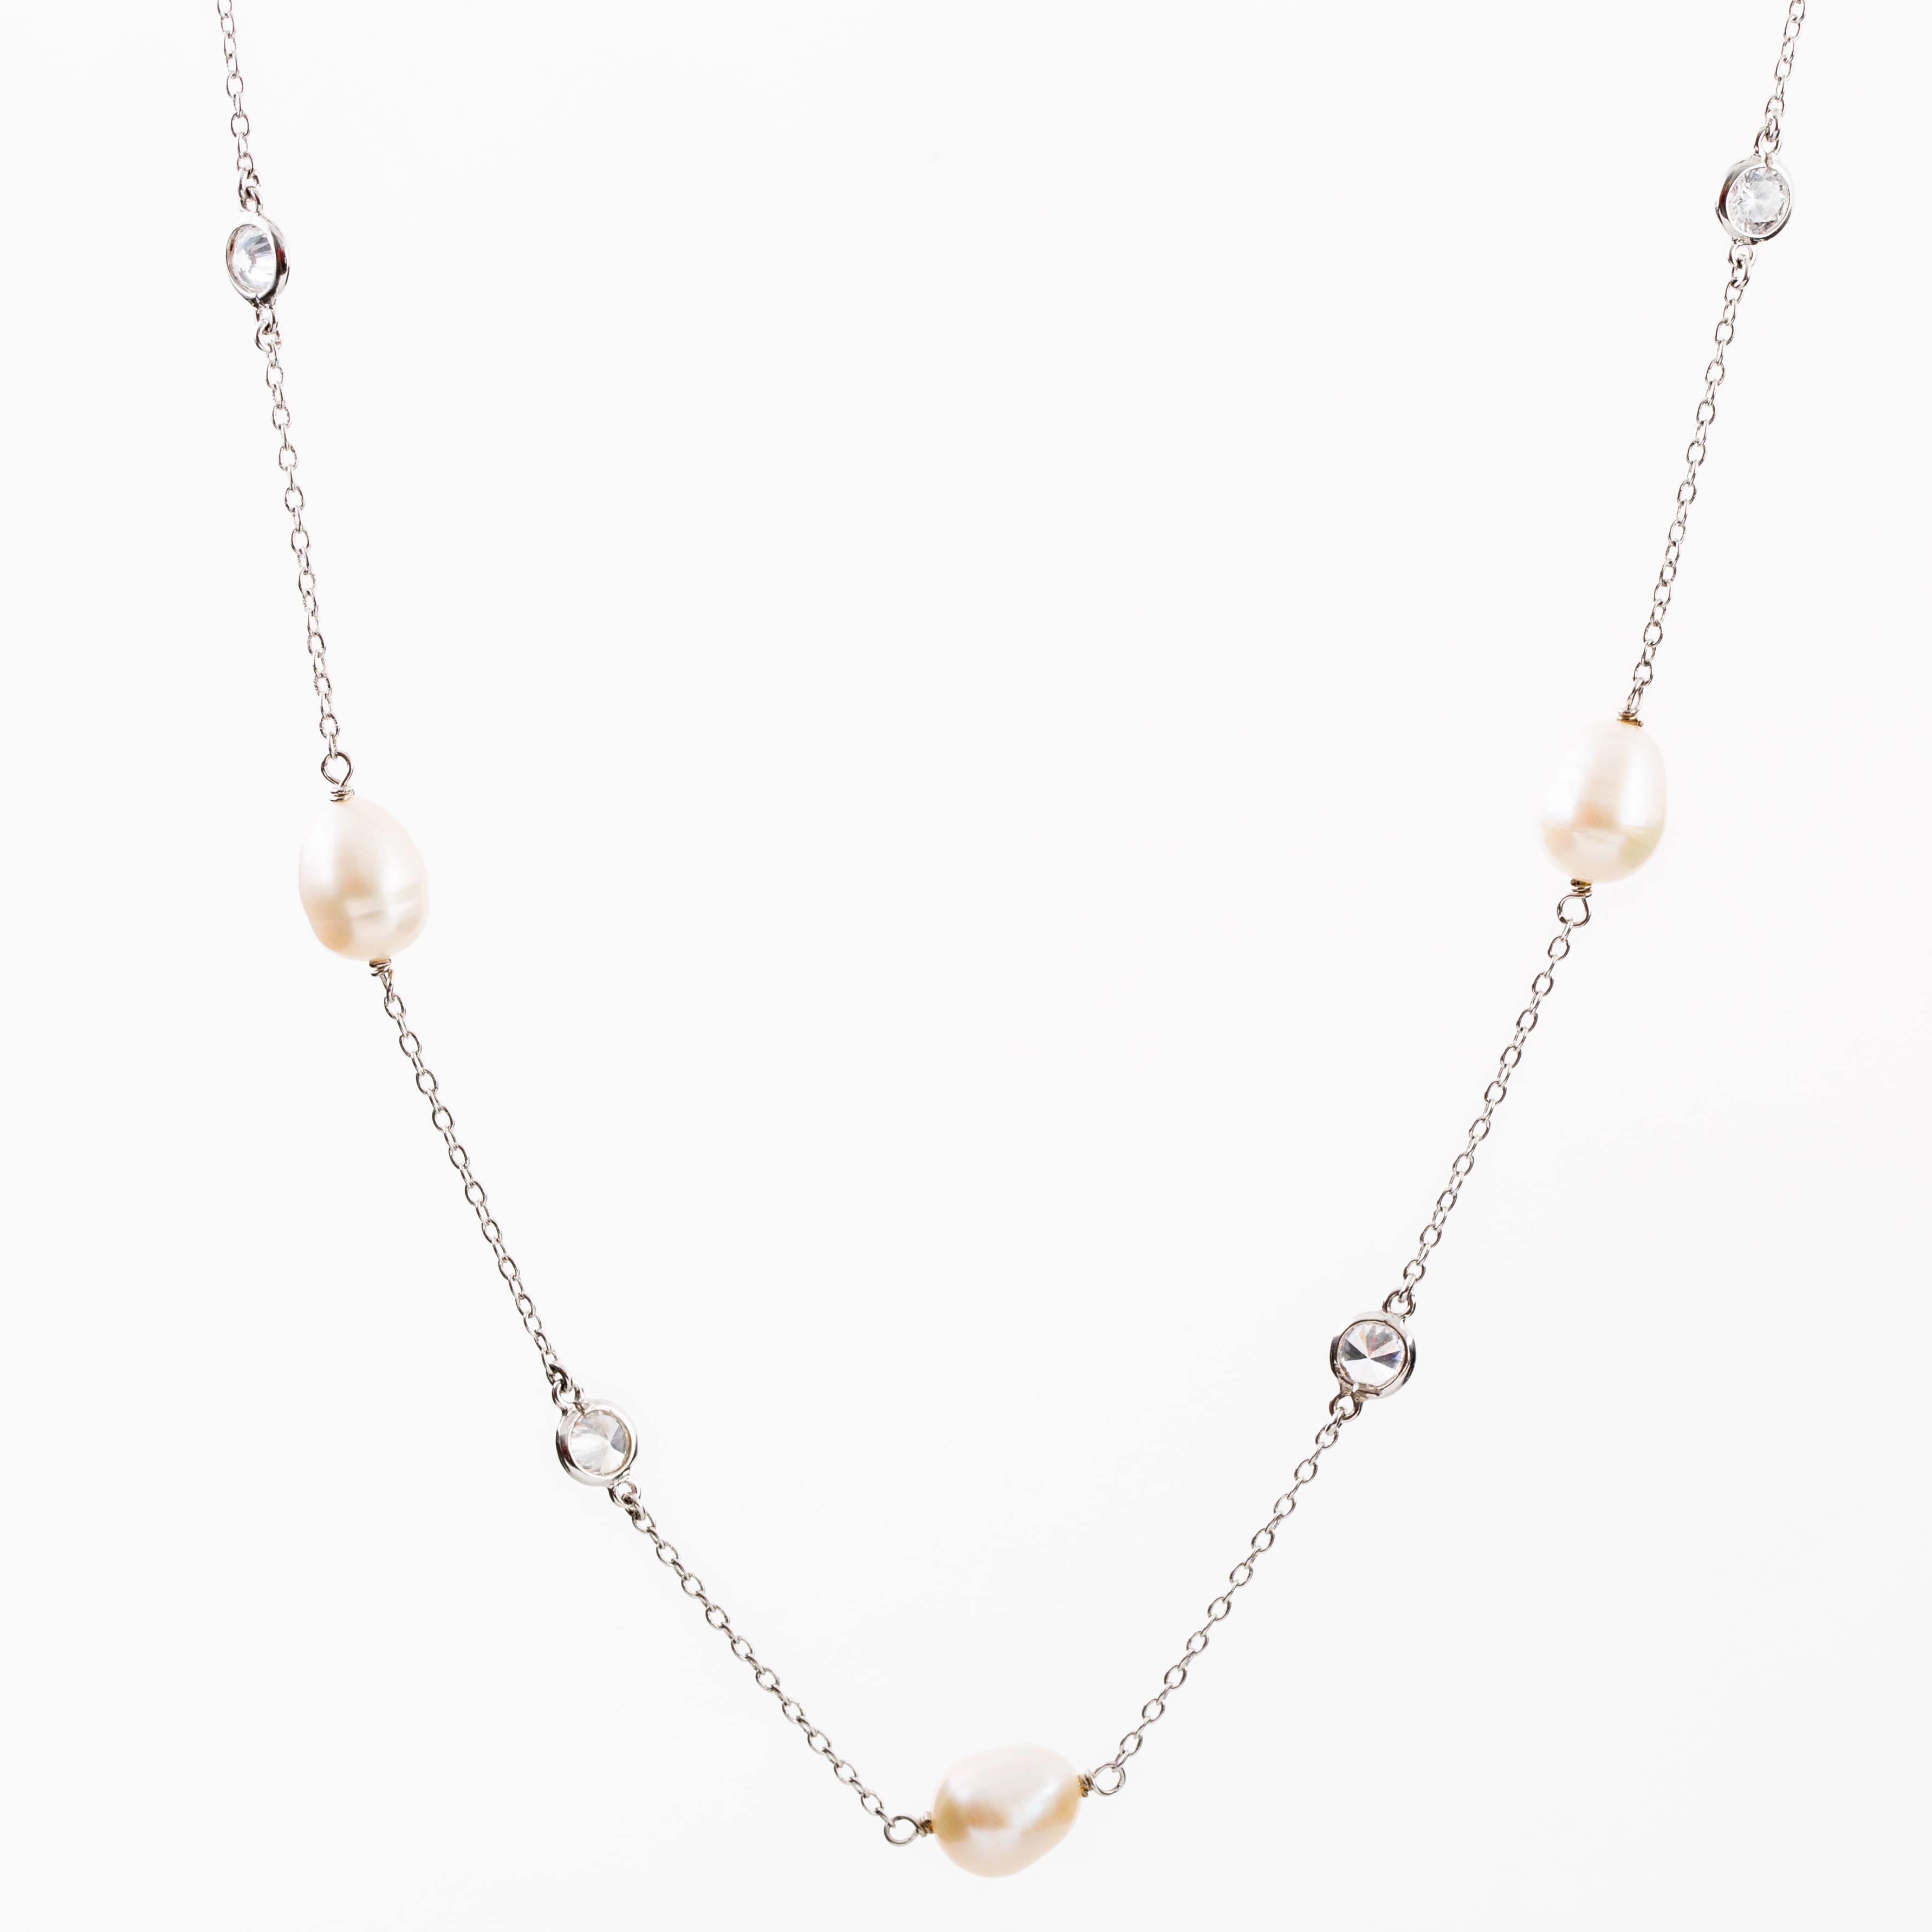 Sterling Silver necklace with Pearl and Cubic Zirconia